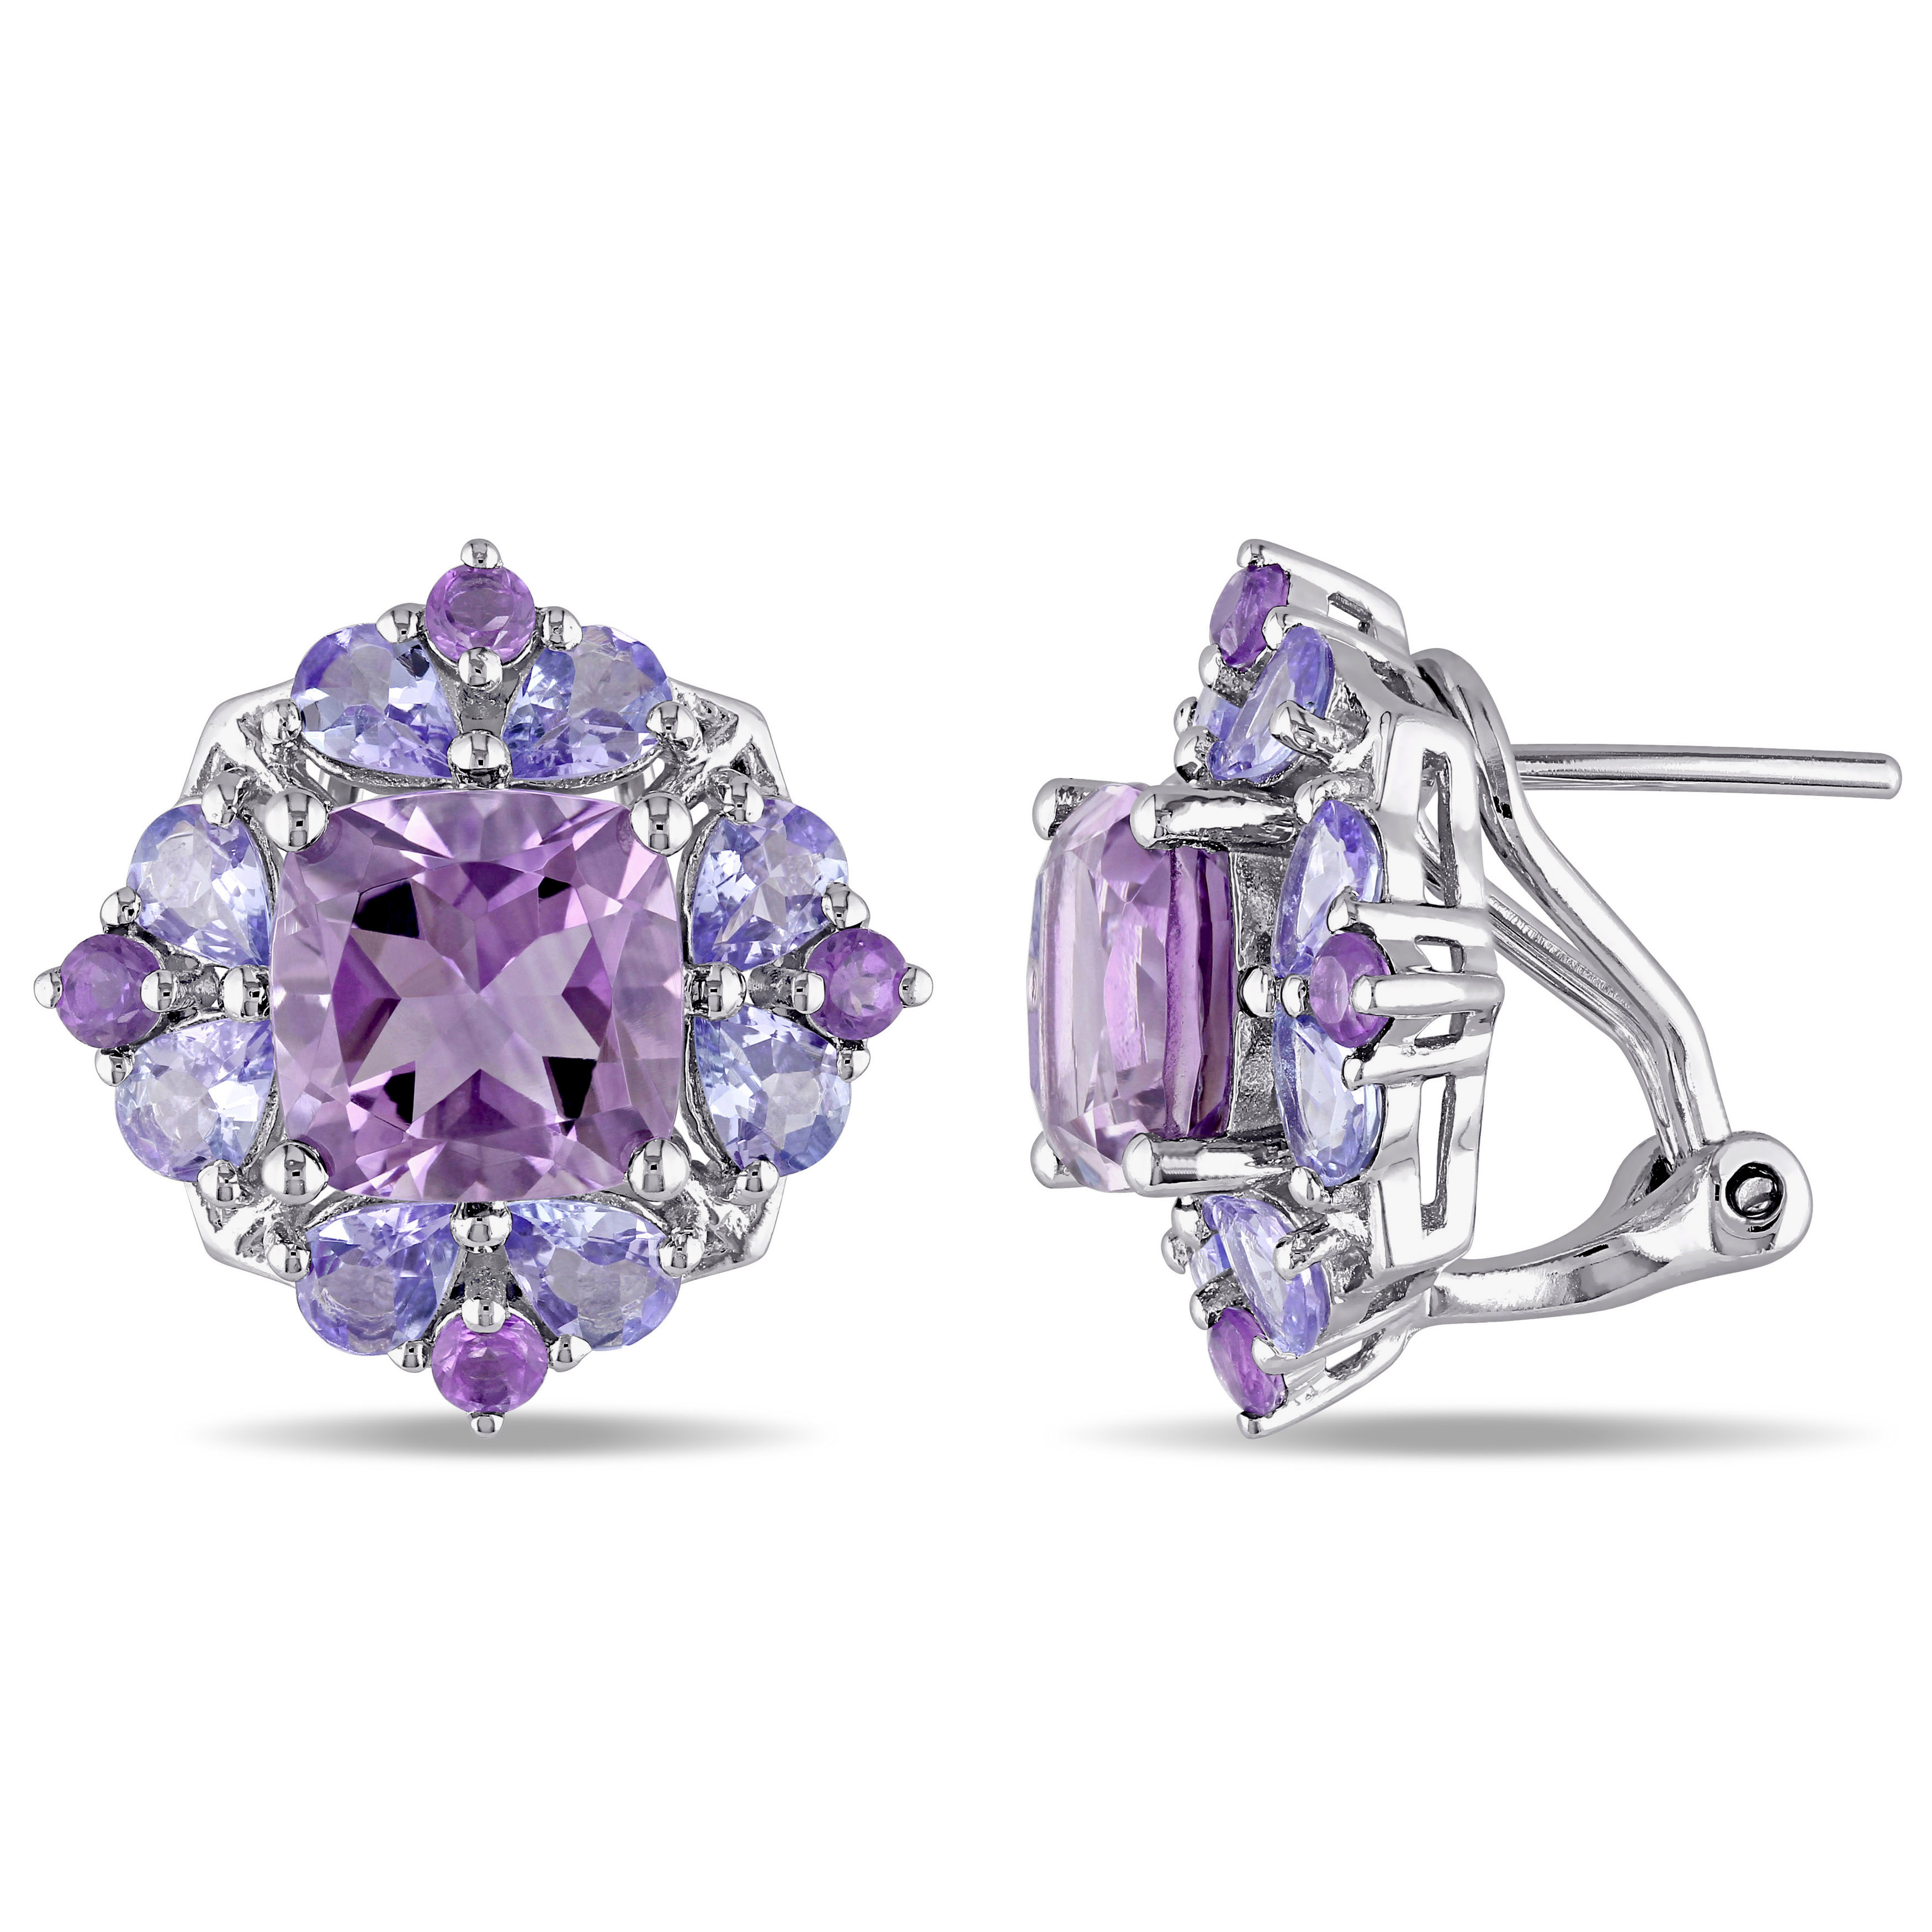 5 7/8 CT TGW Amethyst and Tanzanite Fashion Earrings in Sterling Silver